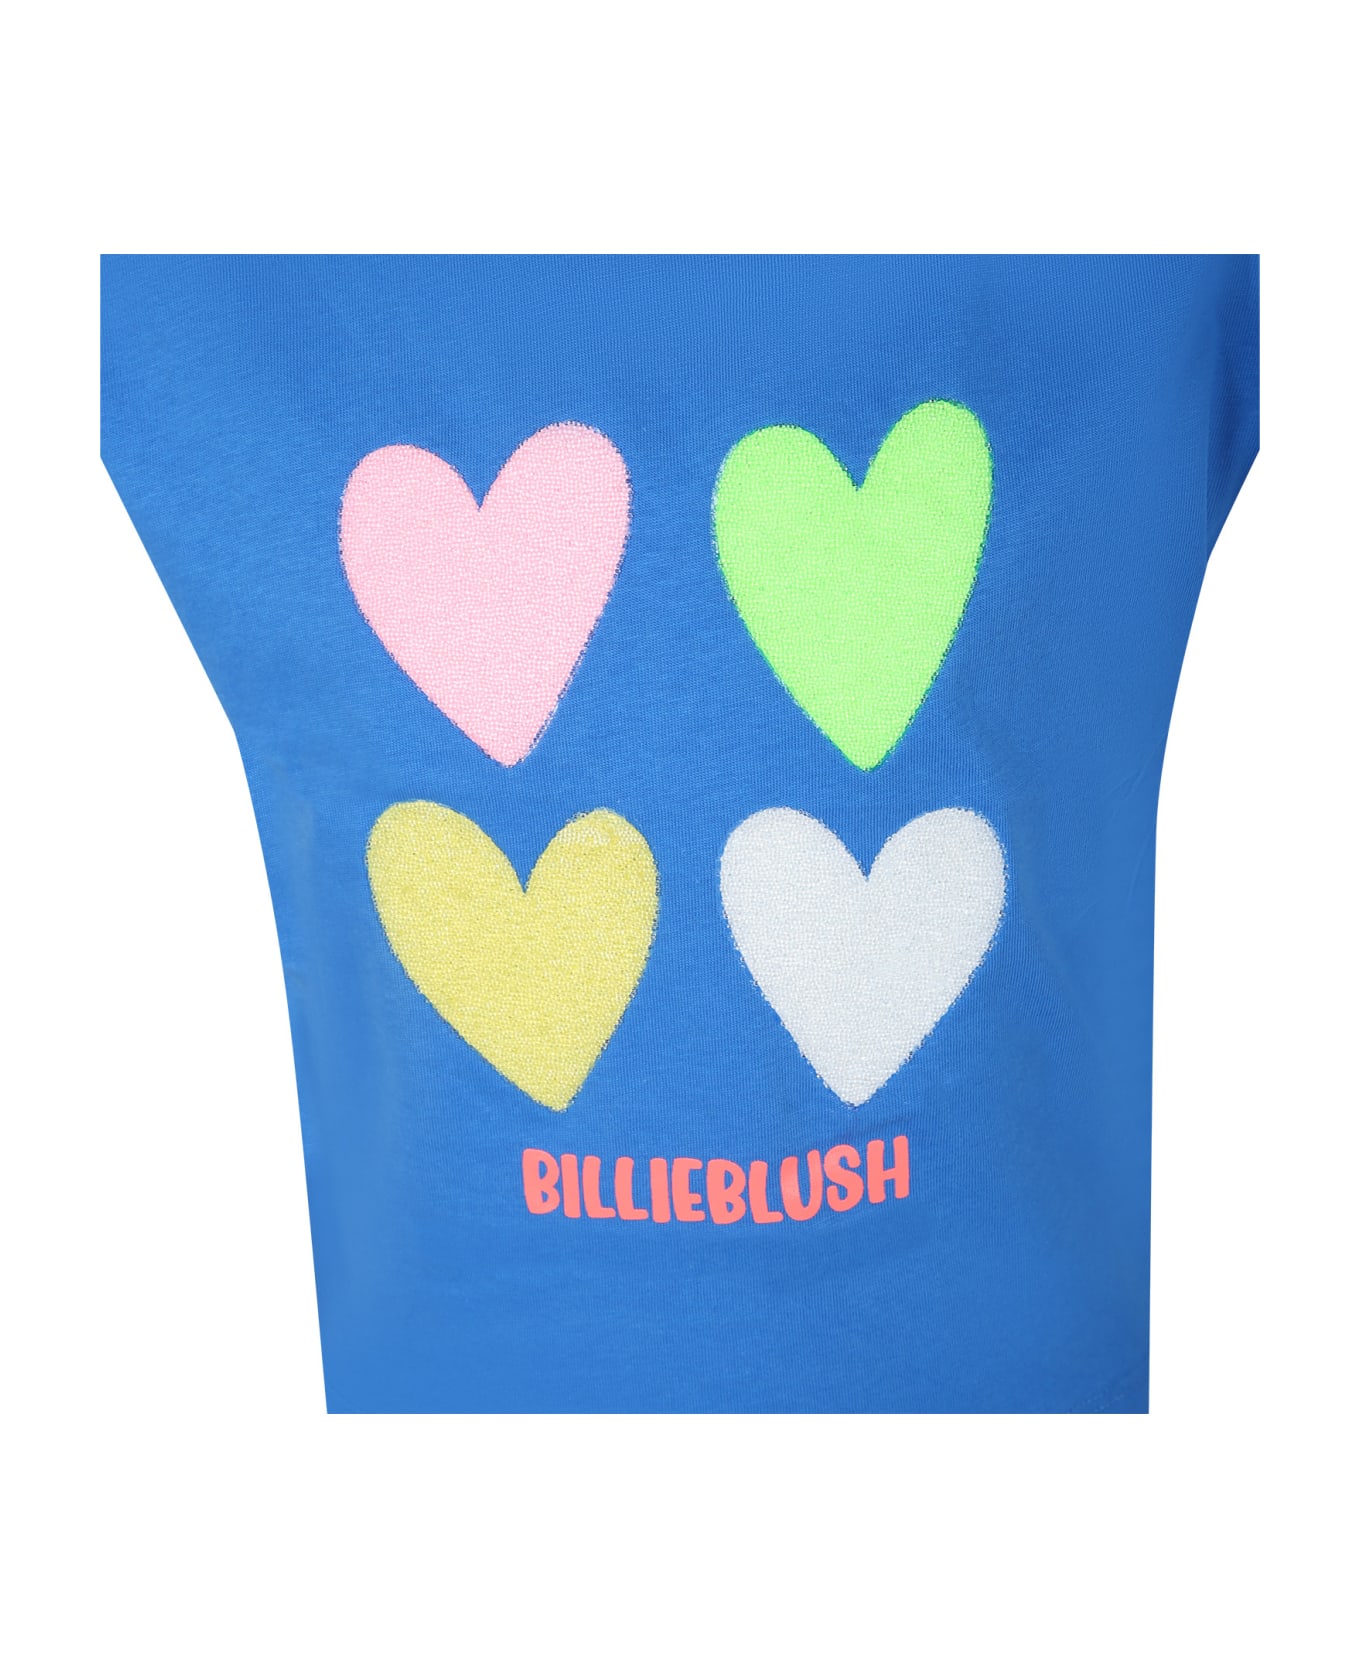 Billieblush Light Blue T-shirt With Multicolor Hearts And Logo - Light Blue